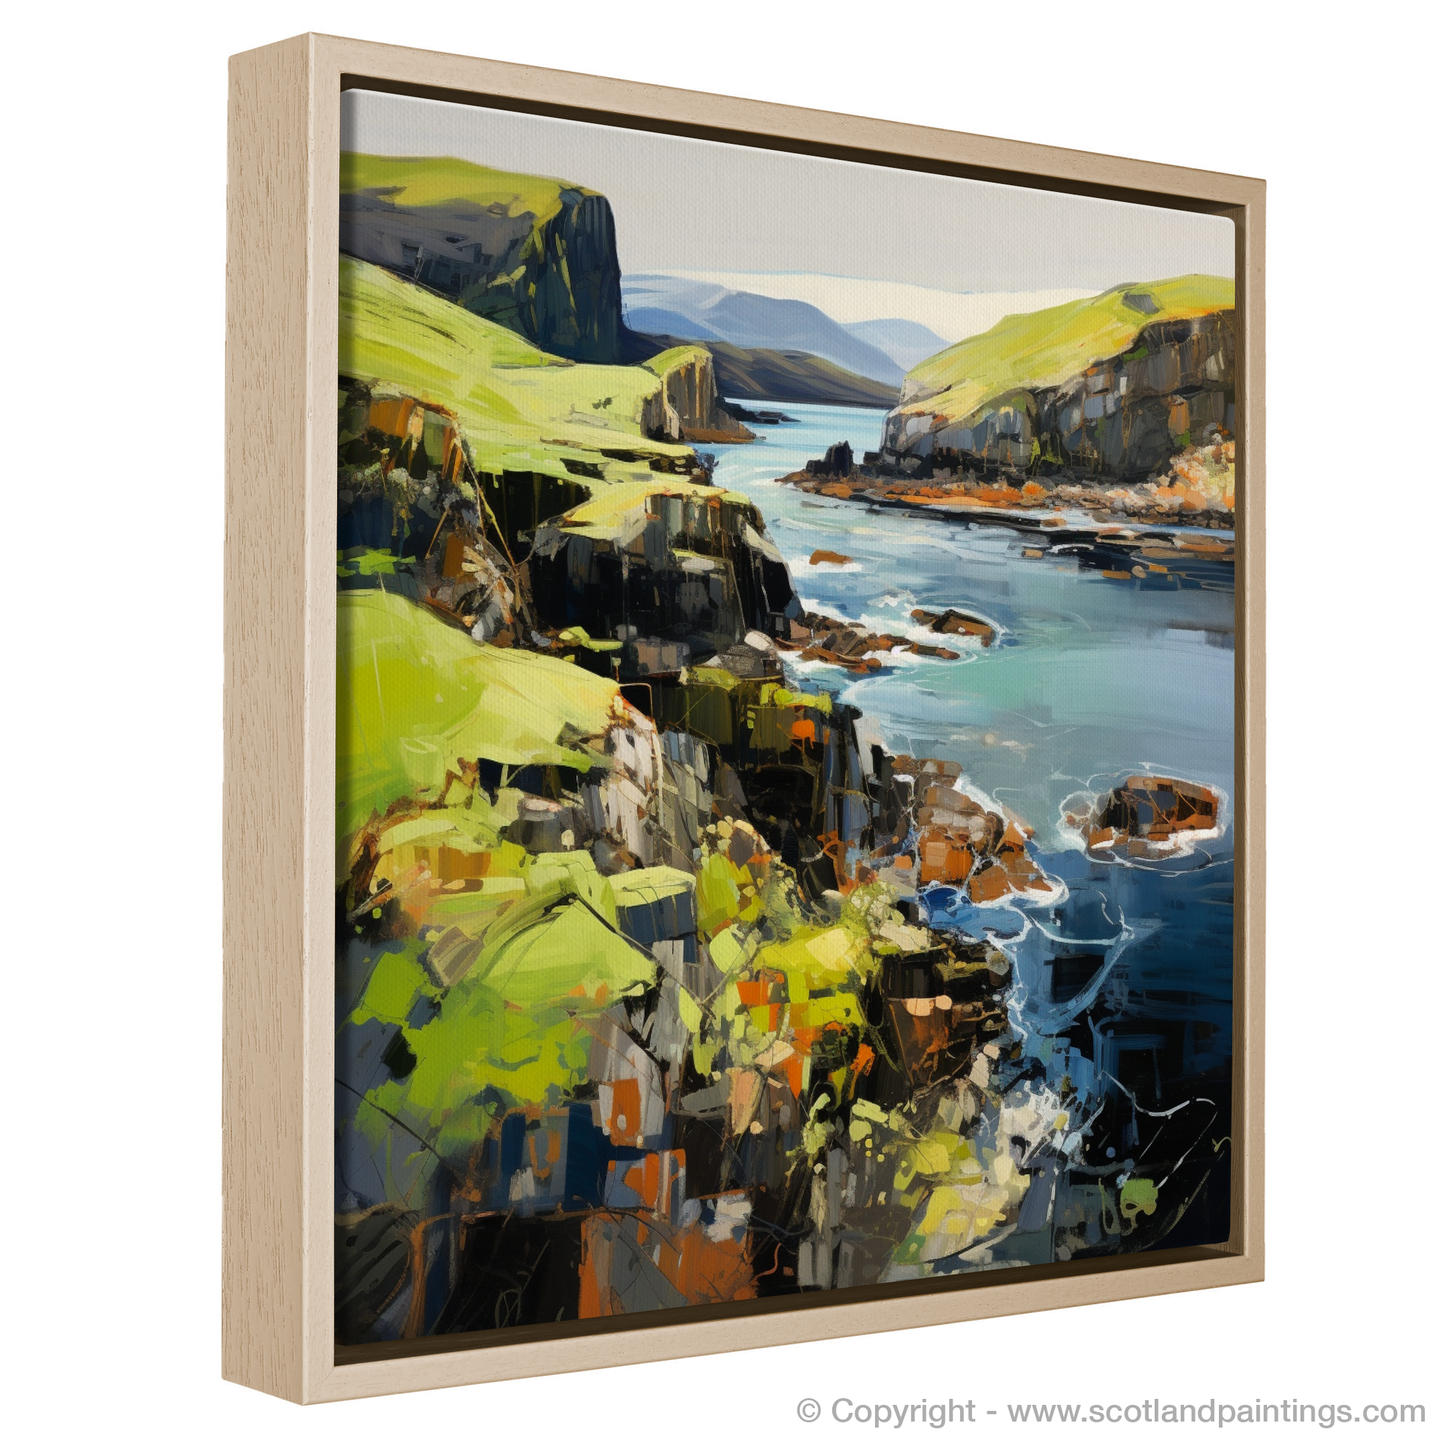 Painting and Art Print of Easdale Sound, Easdale, Argyll and Bute entitled "Easdale Sound Reverie: An Expressionist Homage to Scottish Wilderness".